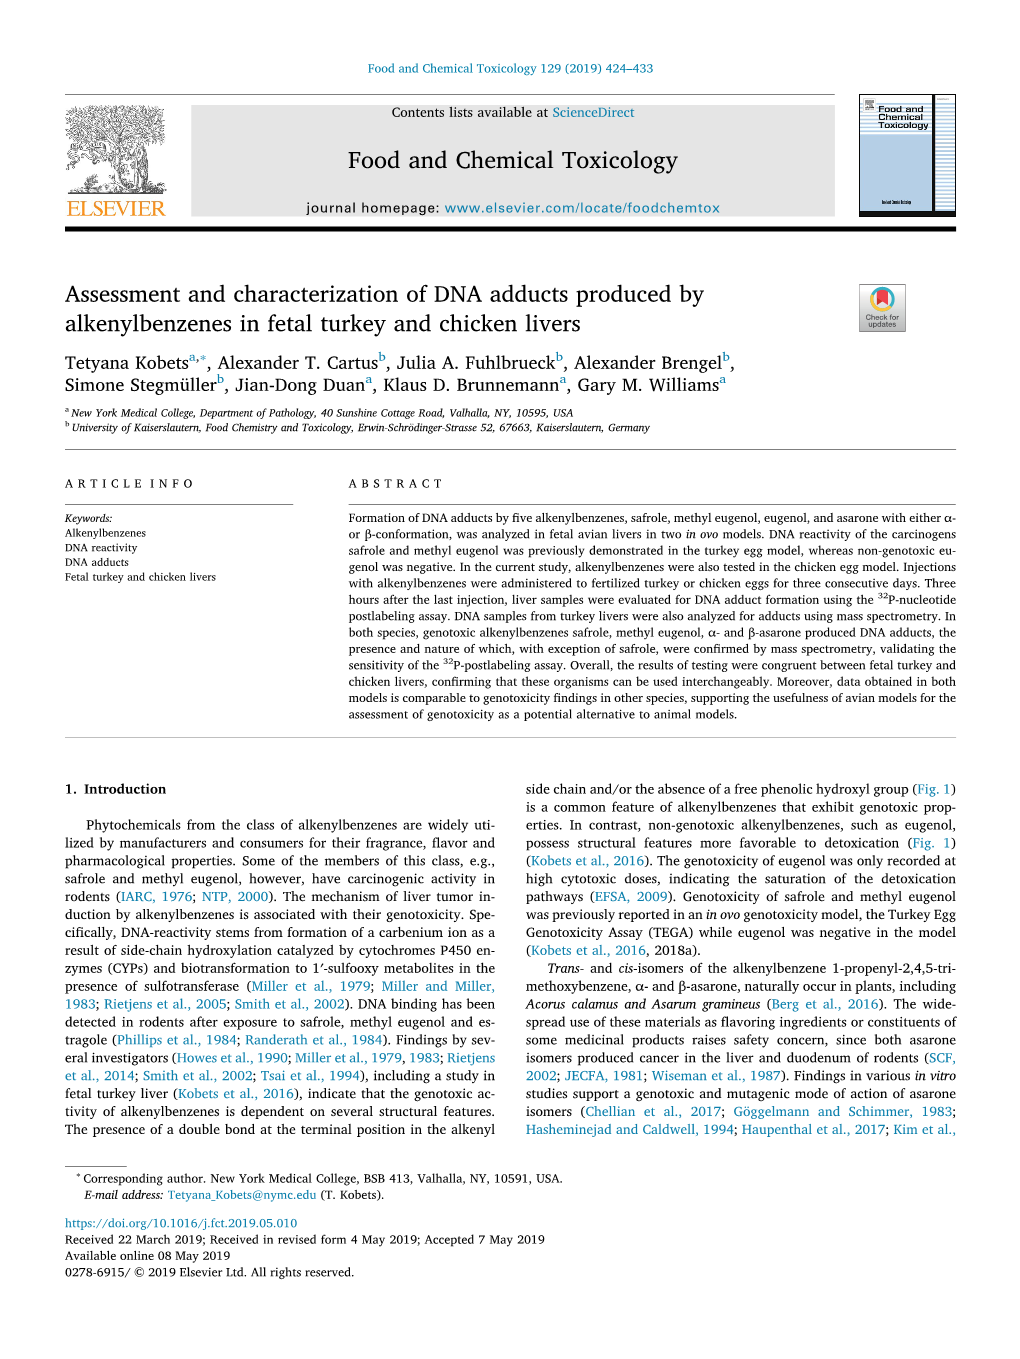 Assessment and Characterization of DNA Adducts Produced by T Alkenylbenzenes in Fetal Turkey and Chicken Livers ∗ Tetyana Kobetsa, , Alexander T